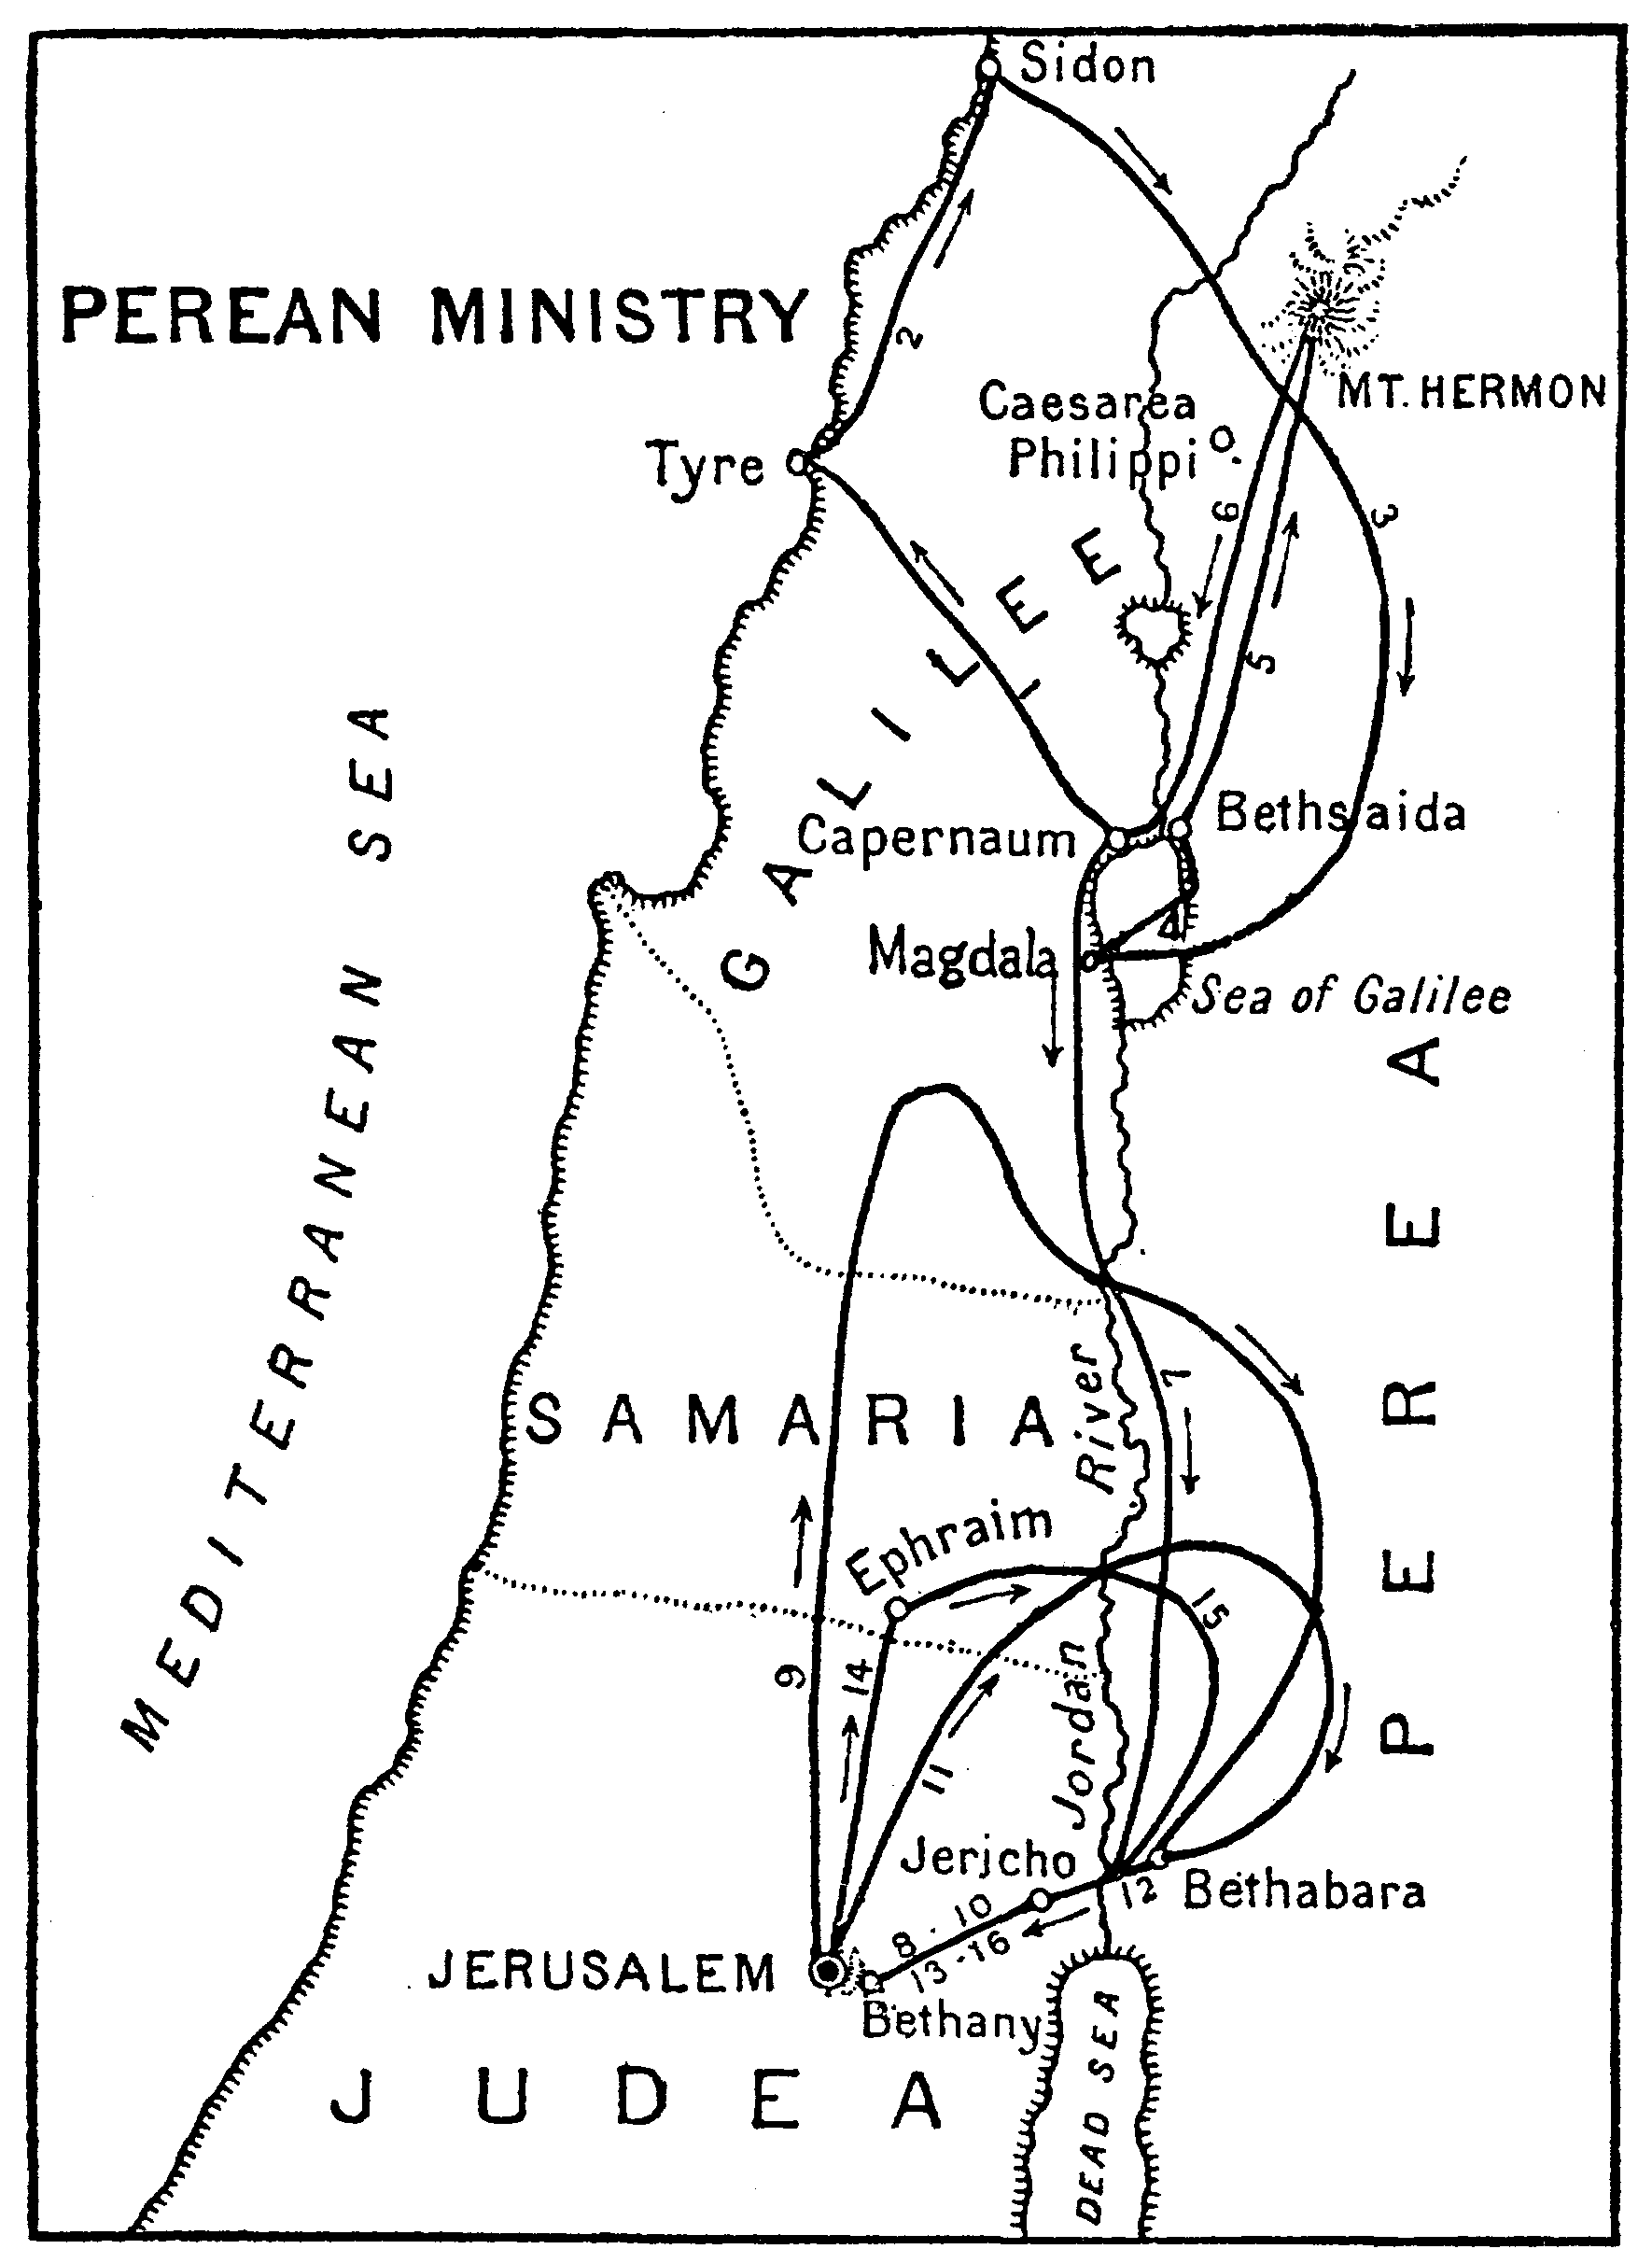 PEREAN MINISTRY